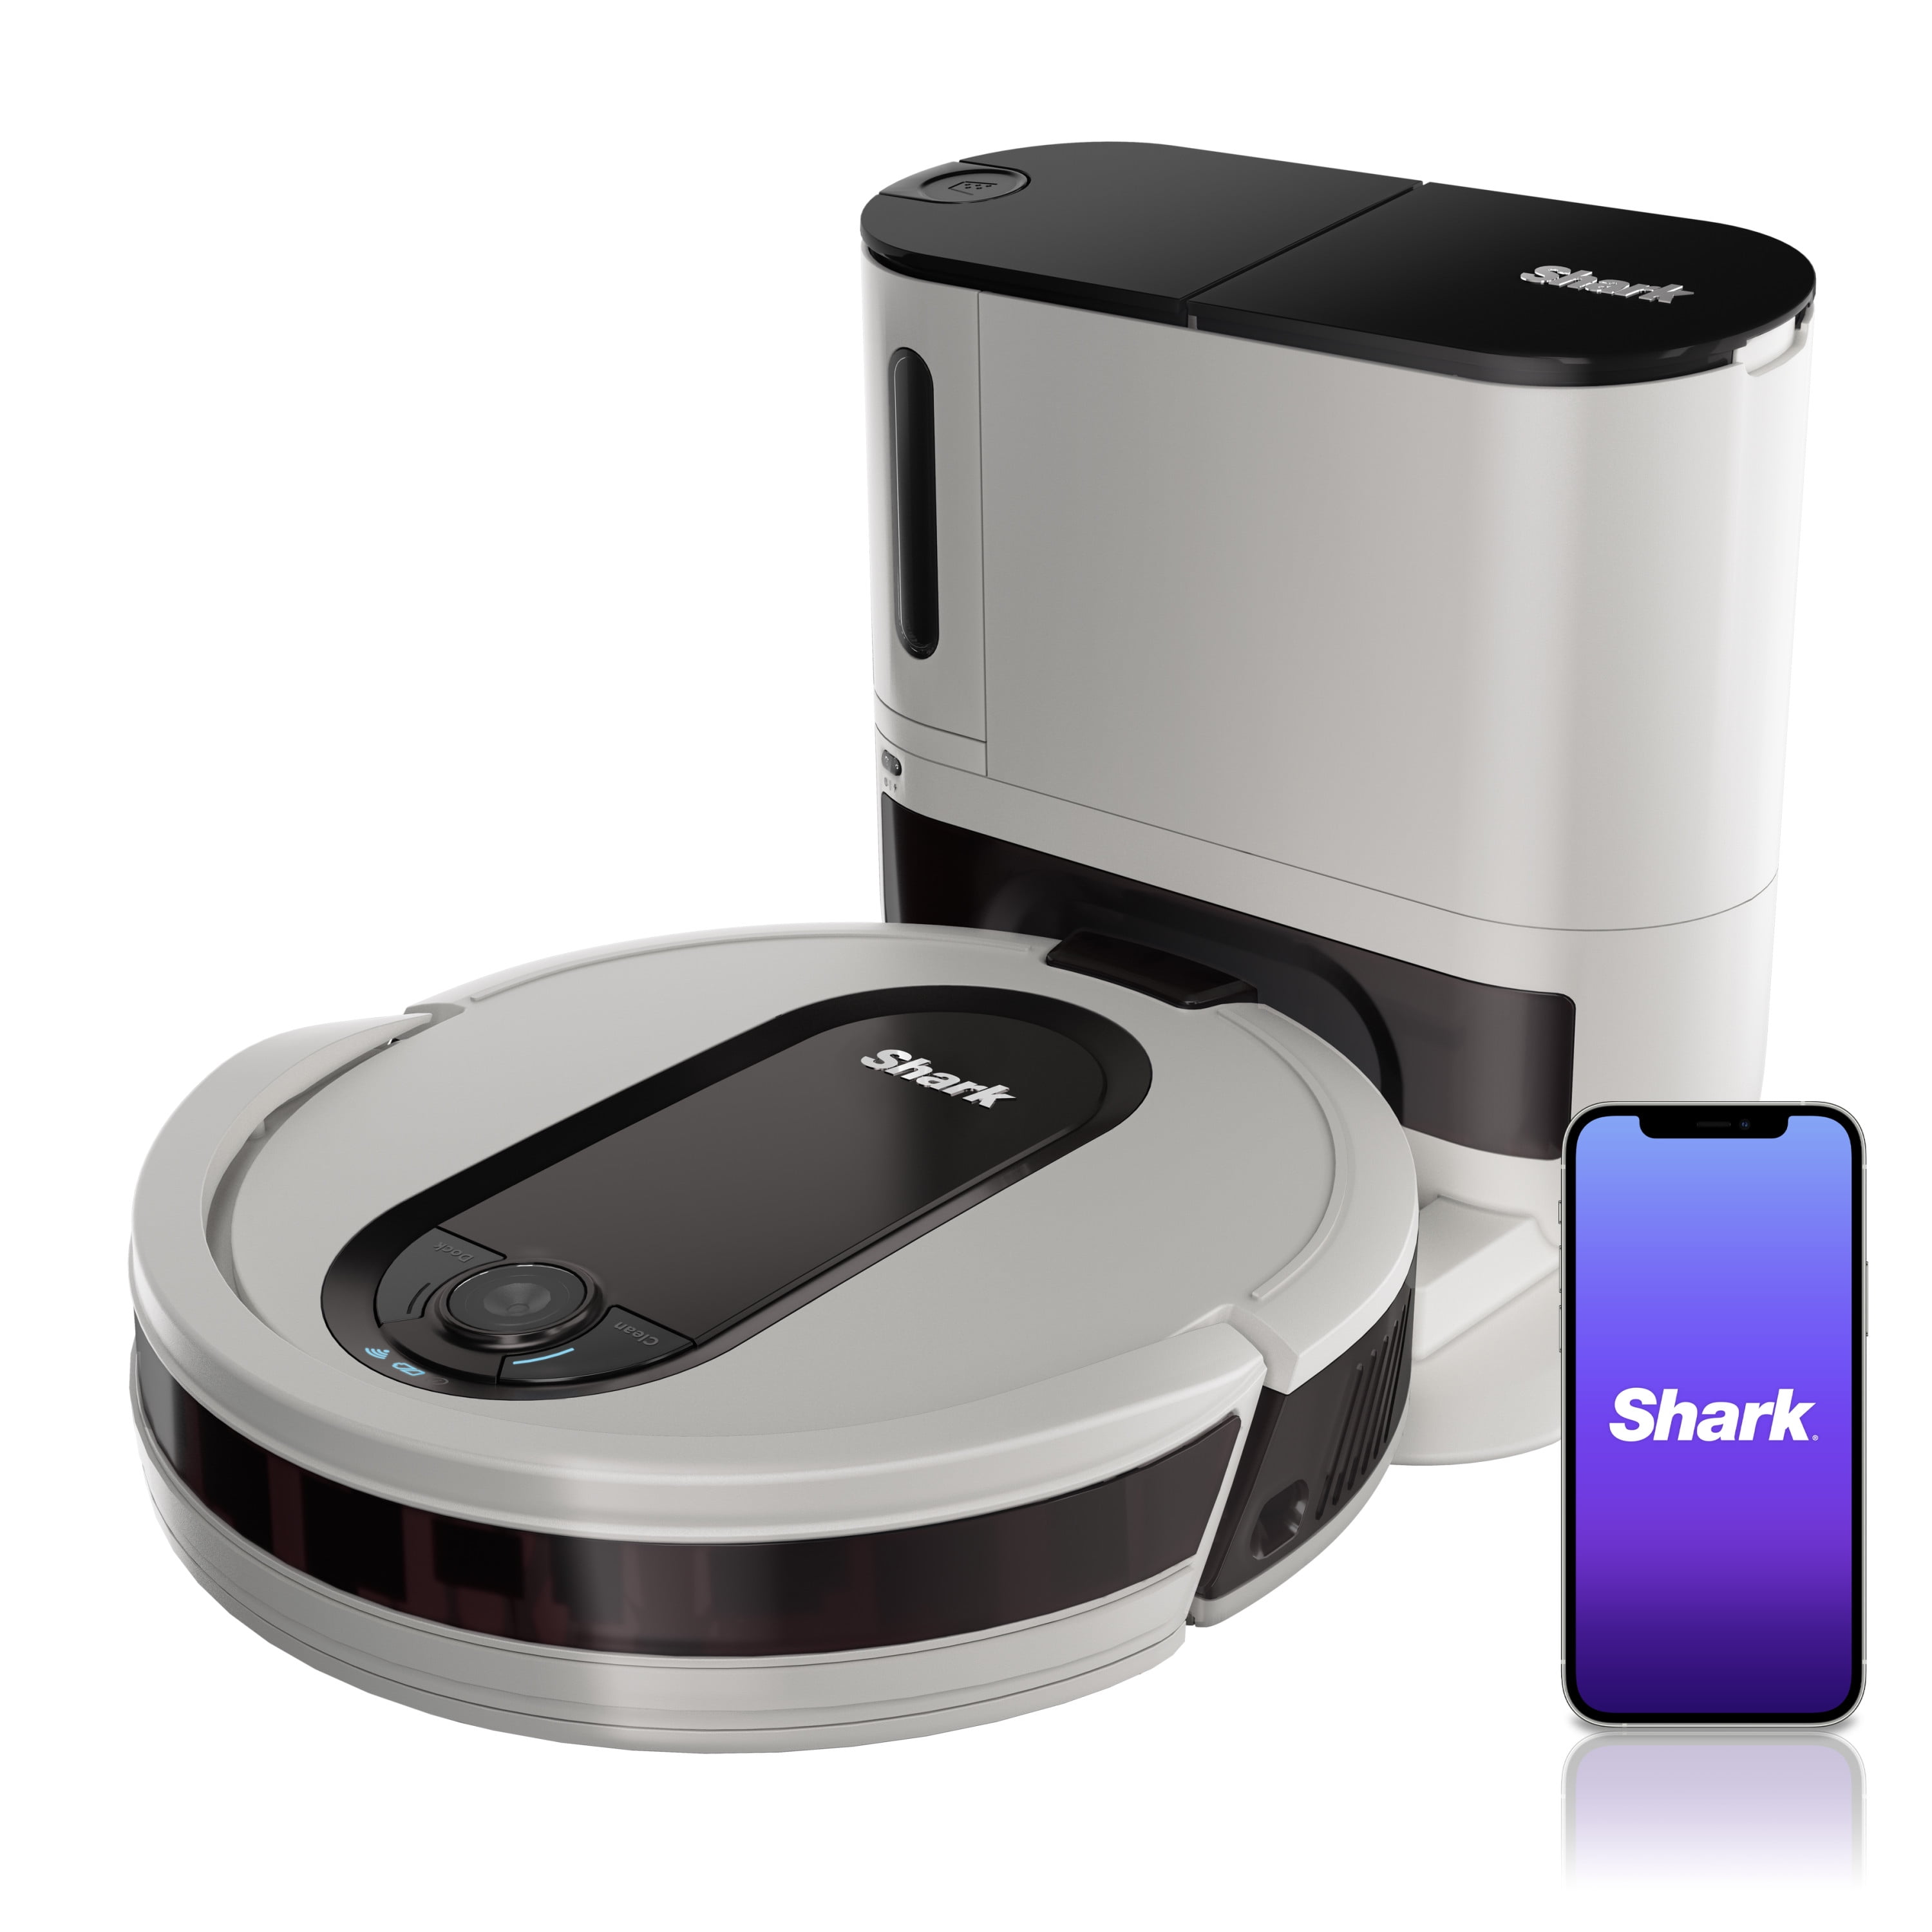 Shark EZ Robot Vacuum with Self-Empty Base, Bagless, Works with Google Assistant, White (RV913S) - Walmart.com